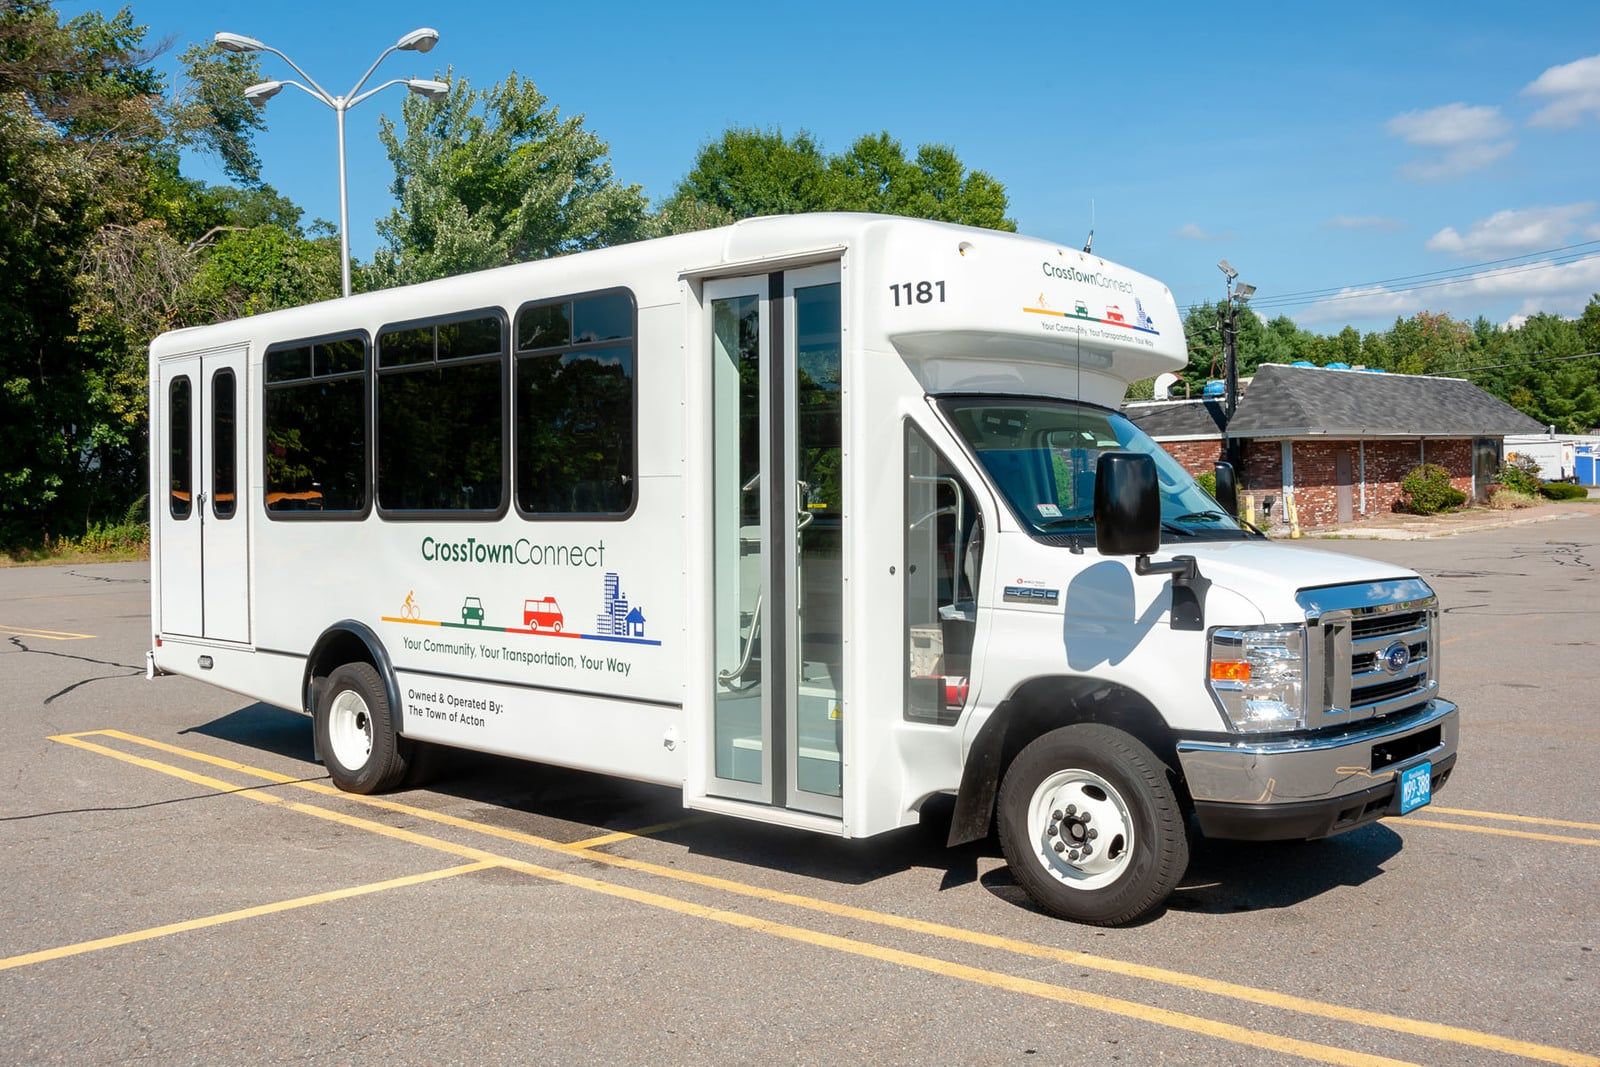 shuttles services